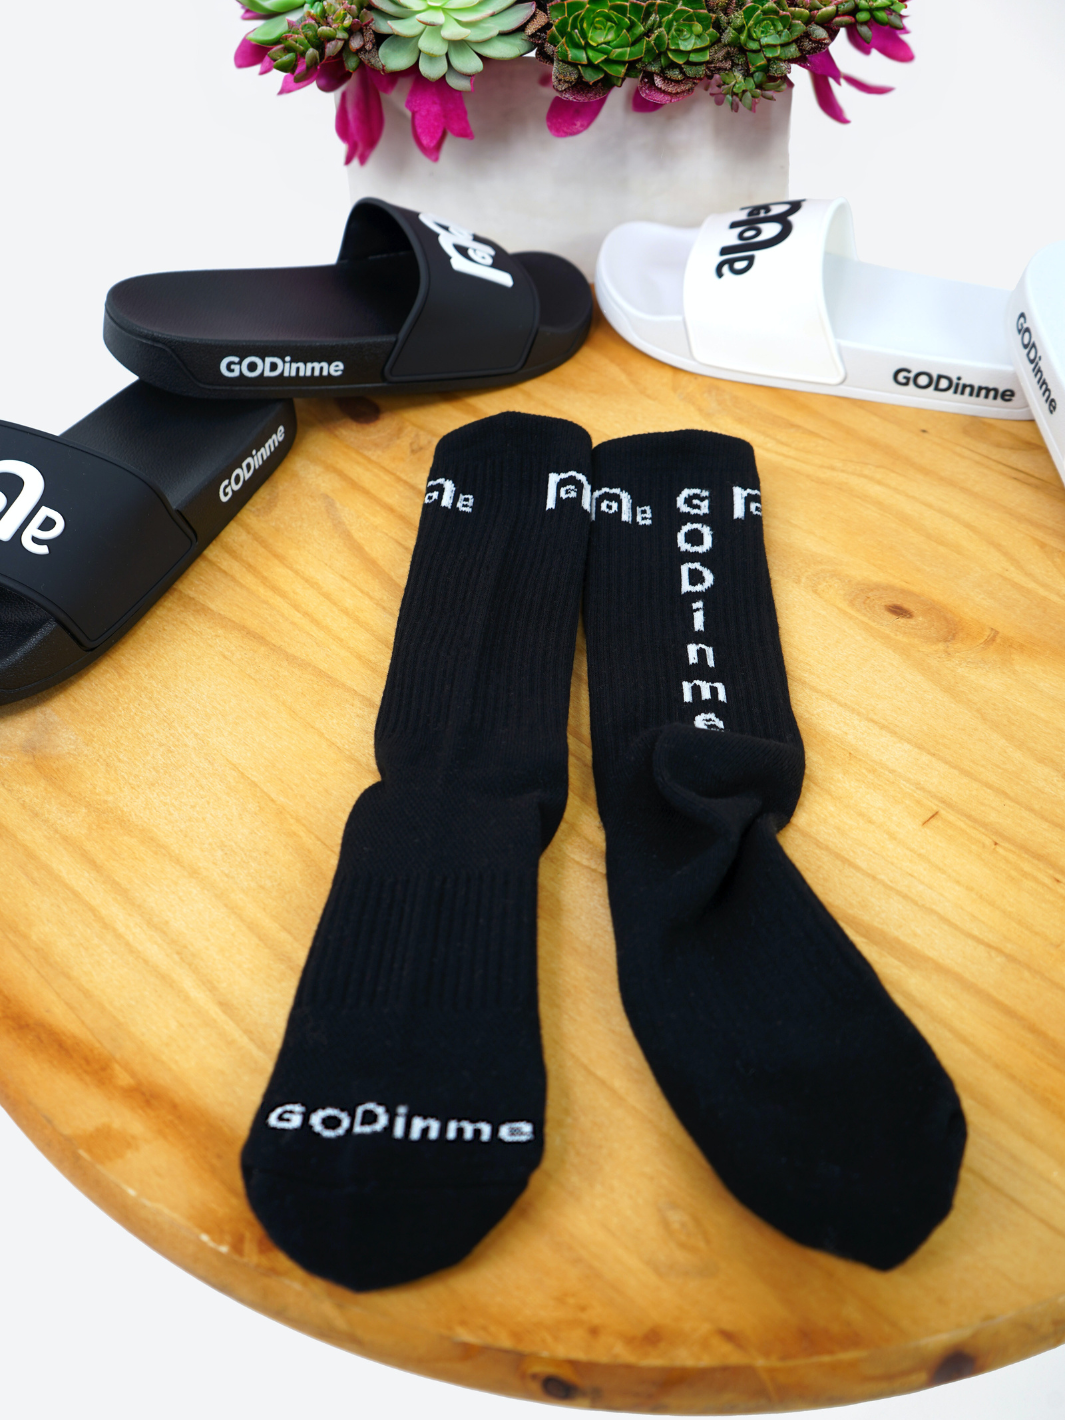 High quality Black Athletic Socks feature the powerful GODinme logo on each side, and GODinme name at toes and also at back achilles area to provide the confidence and motivation to reach your fitness goals.